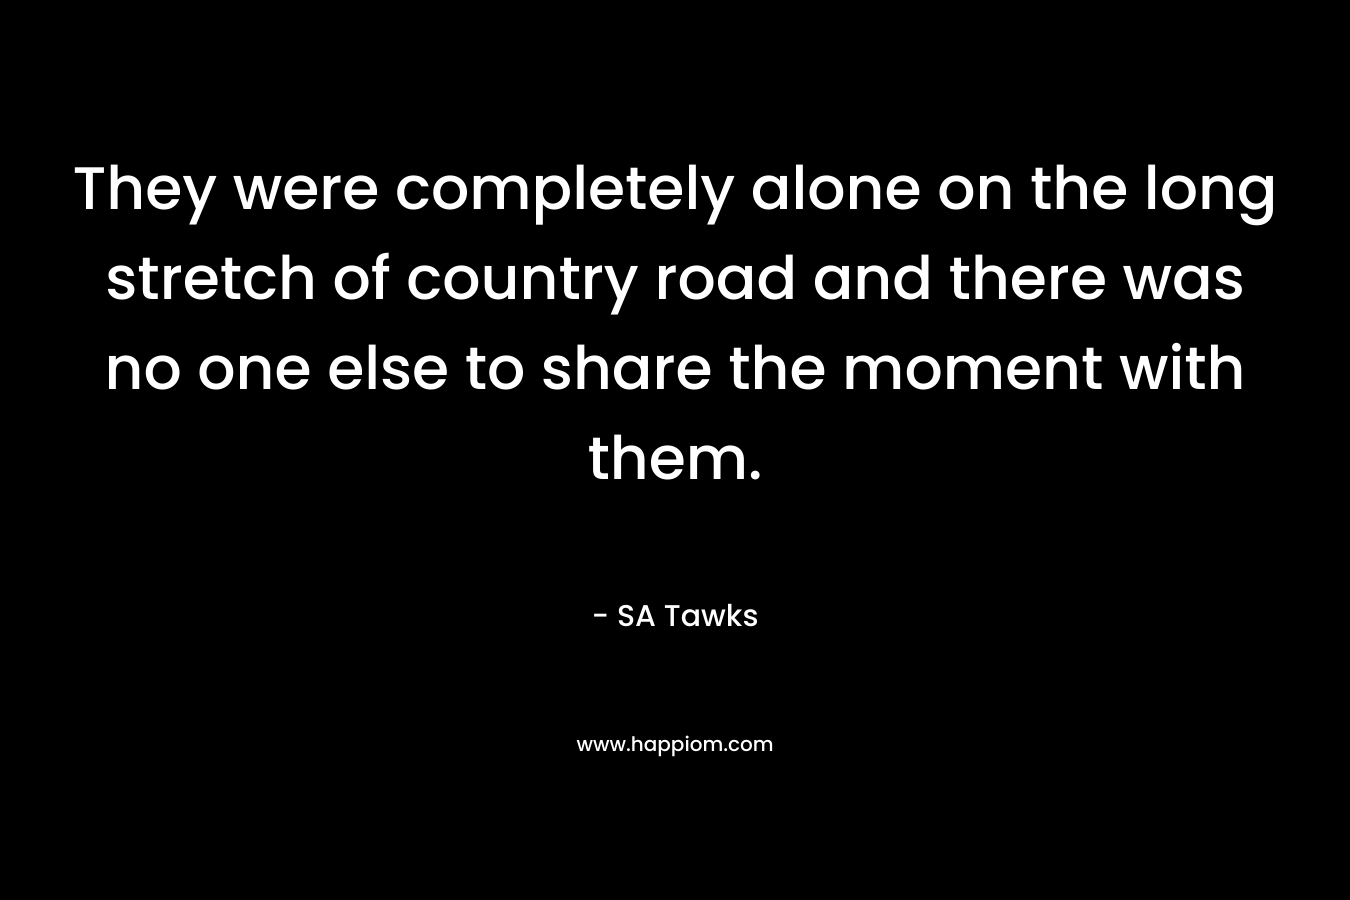 They were completely alone on the long stretch of country road and there was no one else to share the moment with them.